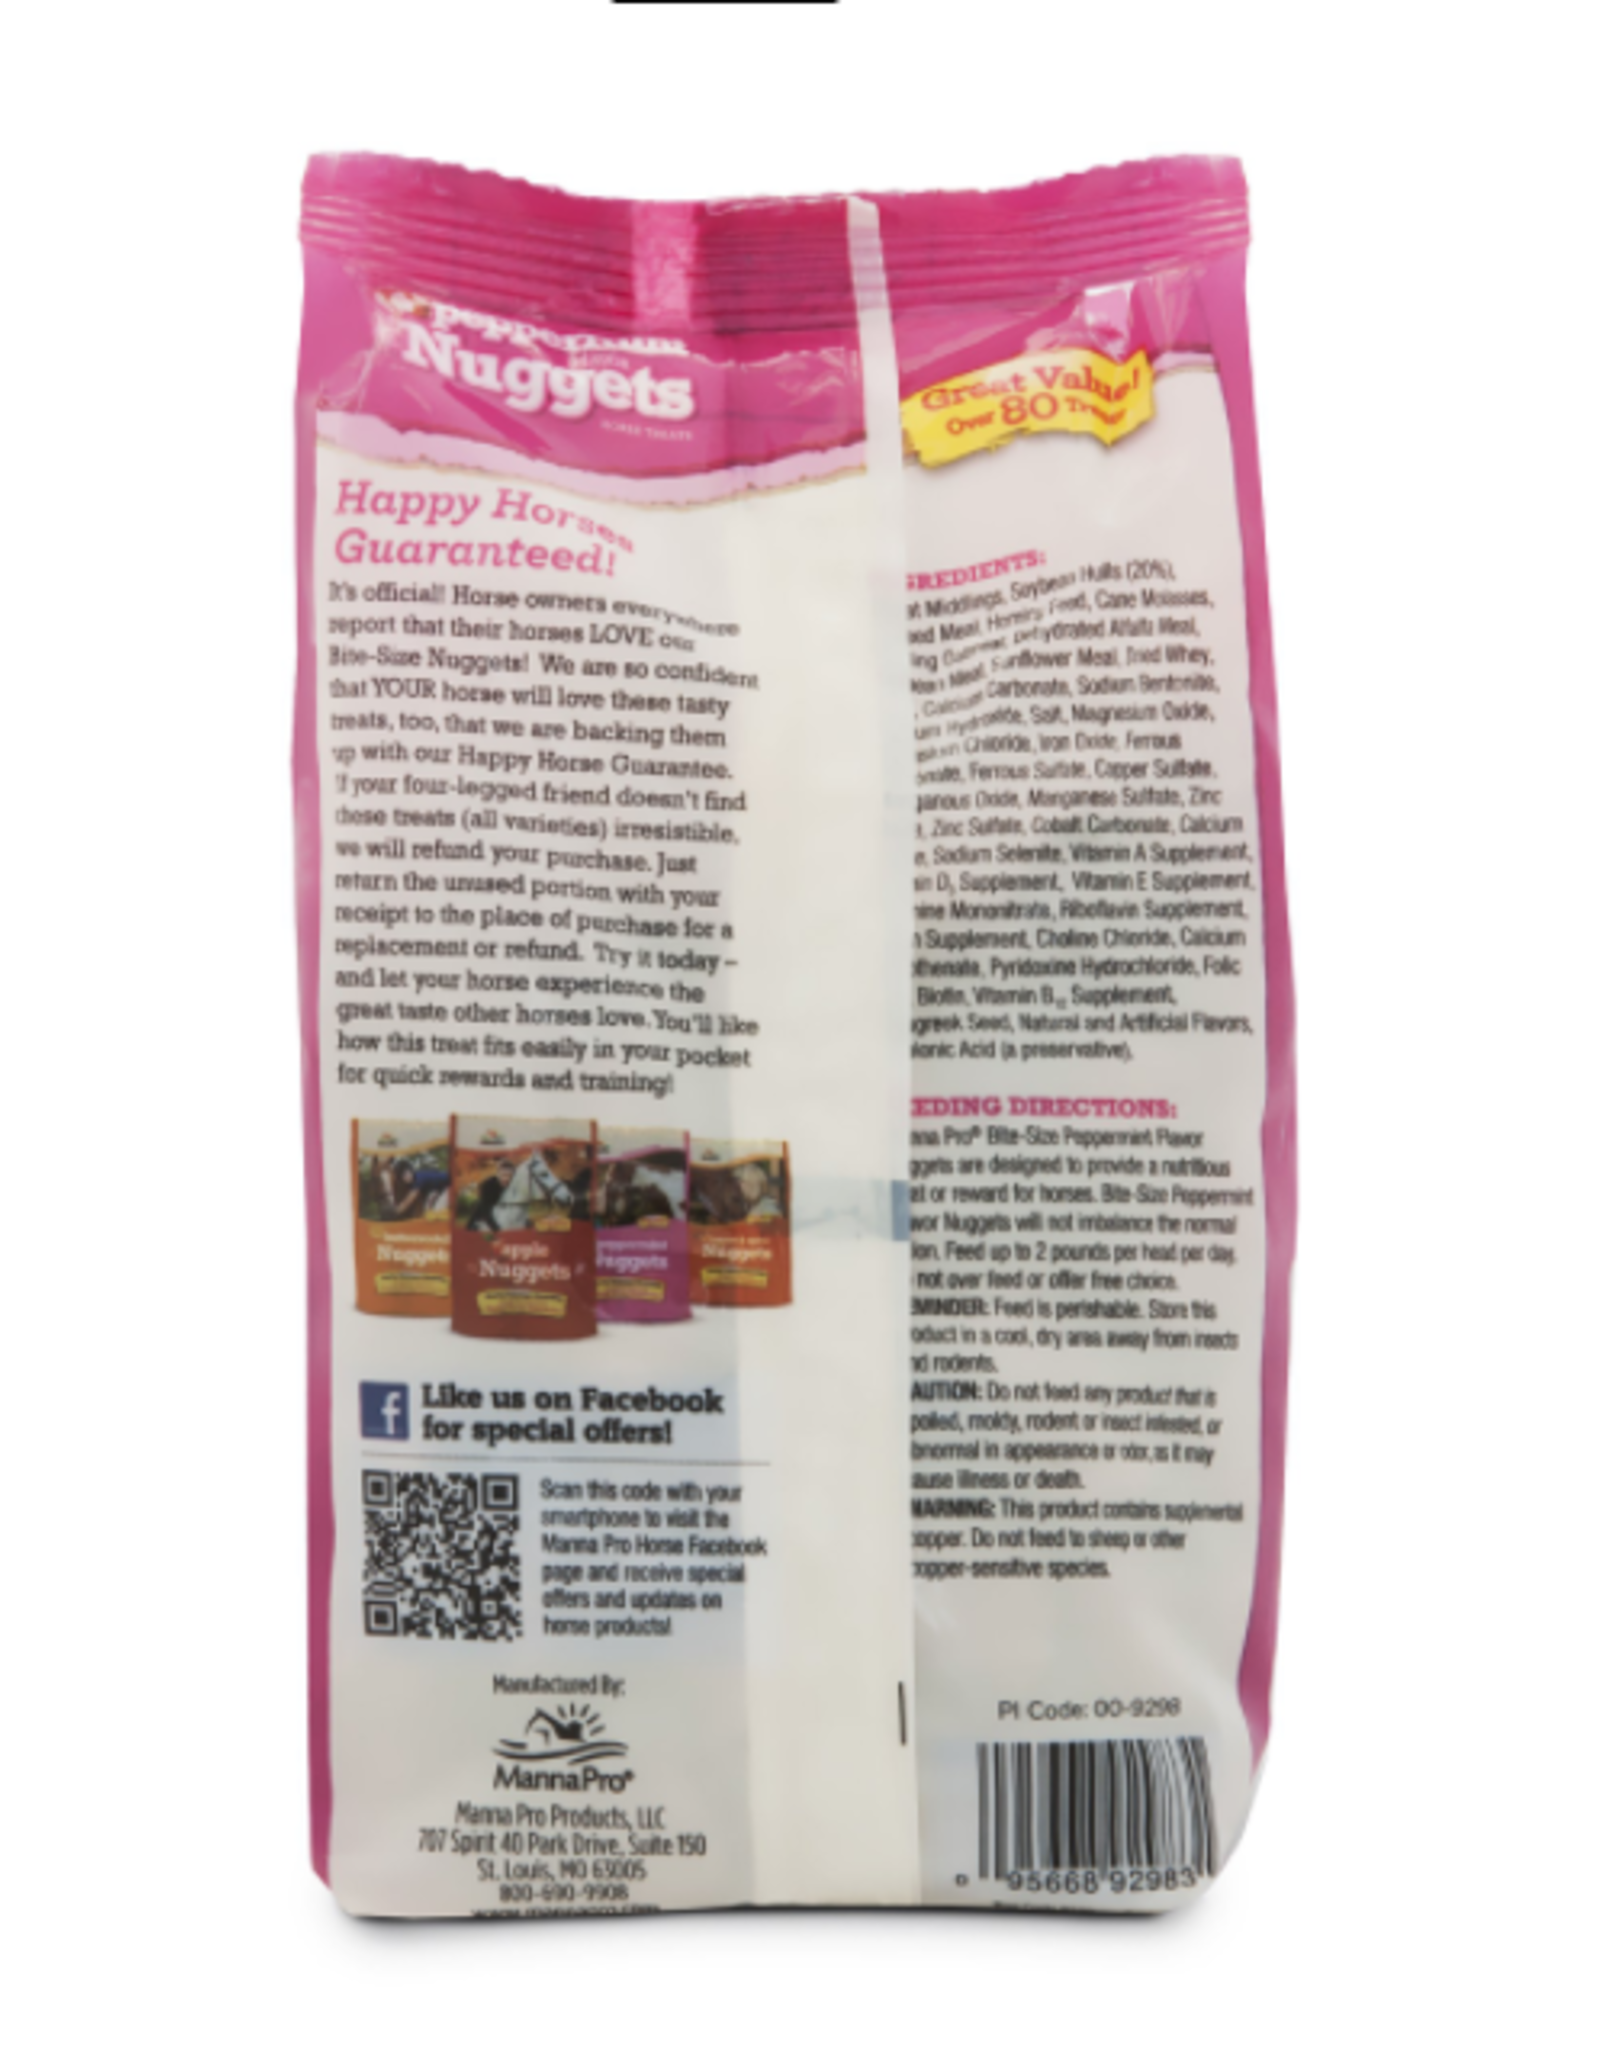 MANNA PRO PRODUCTS LLC PEPPERMINT NUGGETS 1LB BITE-SIZED